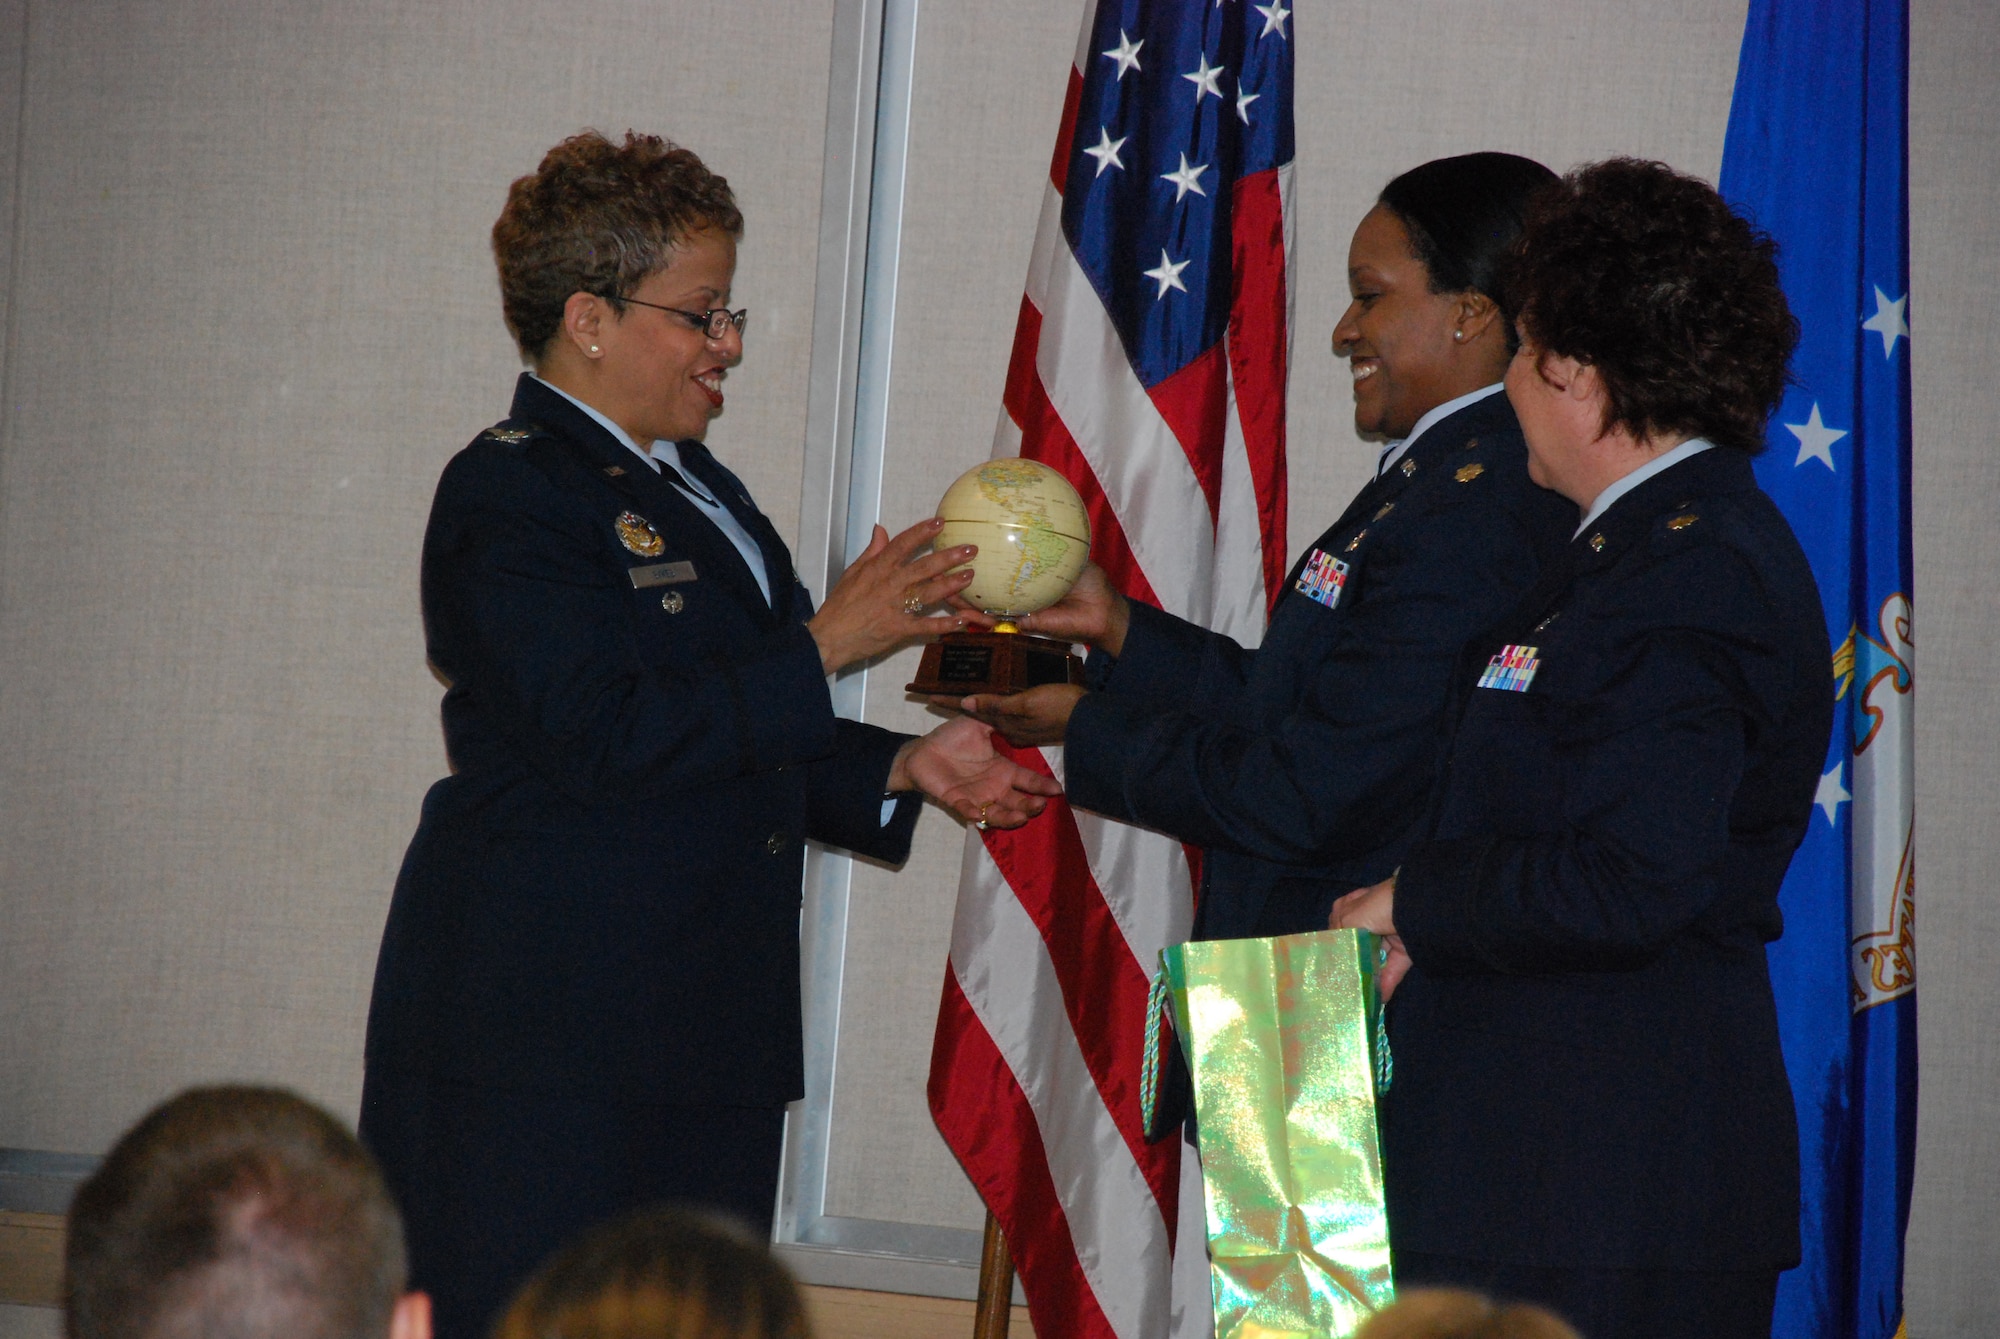 Col. Donnalee Sykes (left), chief of the Education and Training Division and director of the Air Force Nursing Services at Headquarters Air Force, Office of the Surgeon General, accepts a gift of appreciation from Maj. Michele Shelton and Maj. Paula Winters, 383rd Training Squadron Nursing Service Management course supervisors, during the 882nd Training Group NSM graduation at the Bldg. 1900 small auditorium March 30.  Colonel Sykes was the first officer of such high position to officiate an NSM graduation at Sheppard Air Force Base, Texas. (U.S. Air Force photo/Airman 1st Class Valerie Hosea)